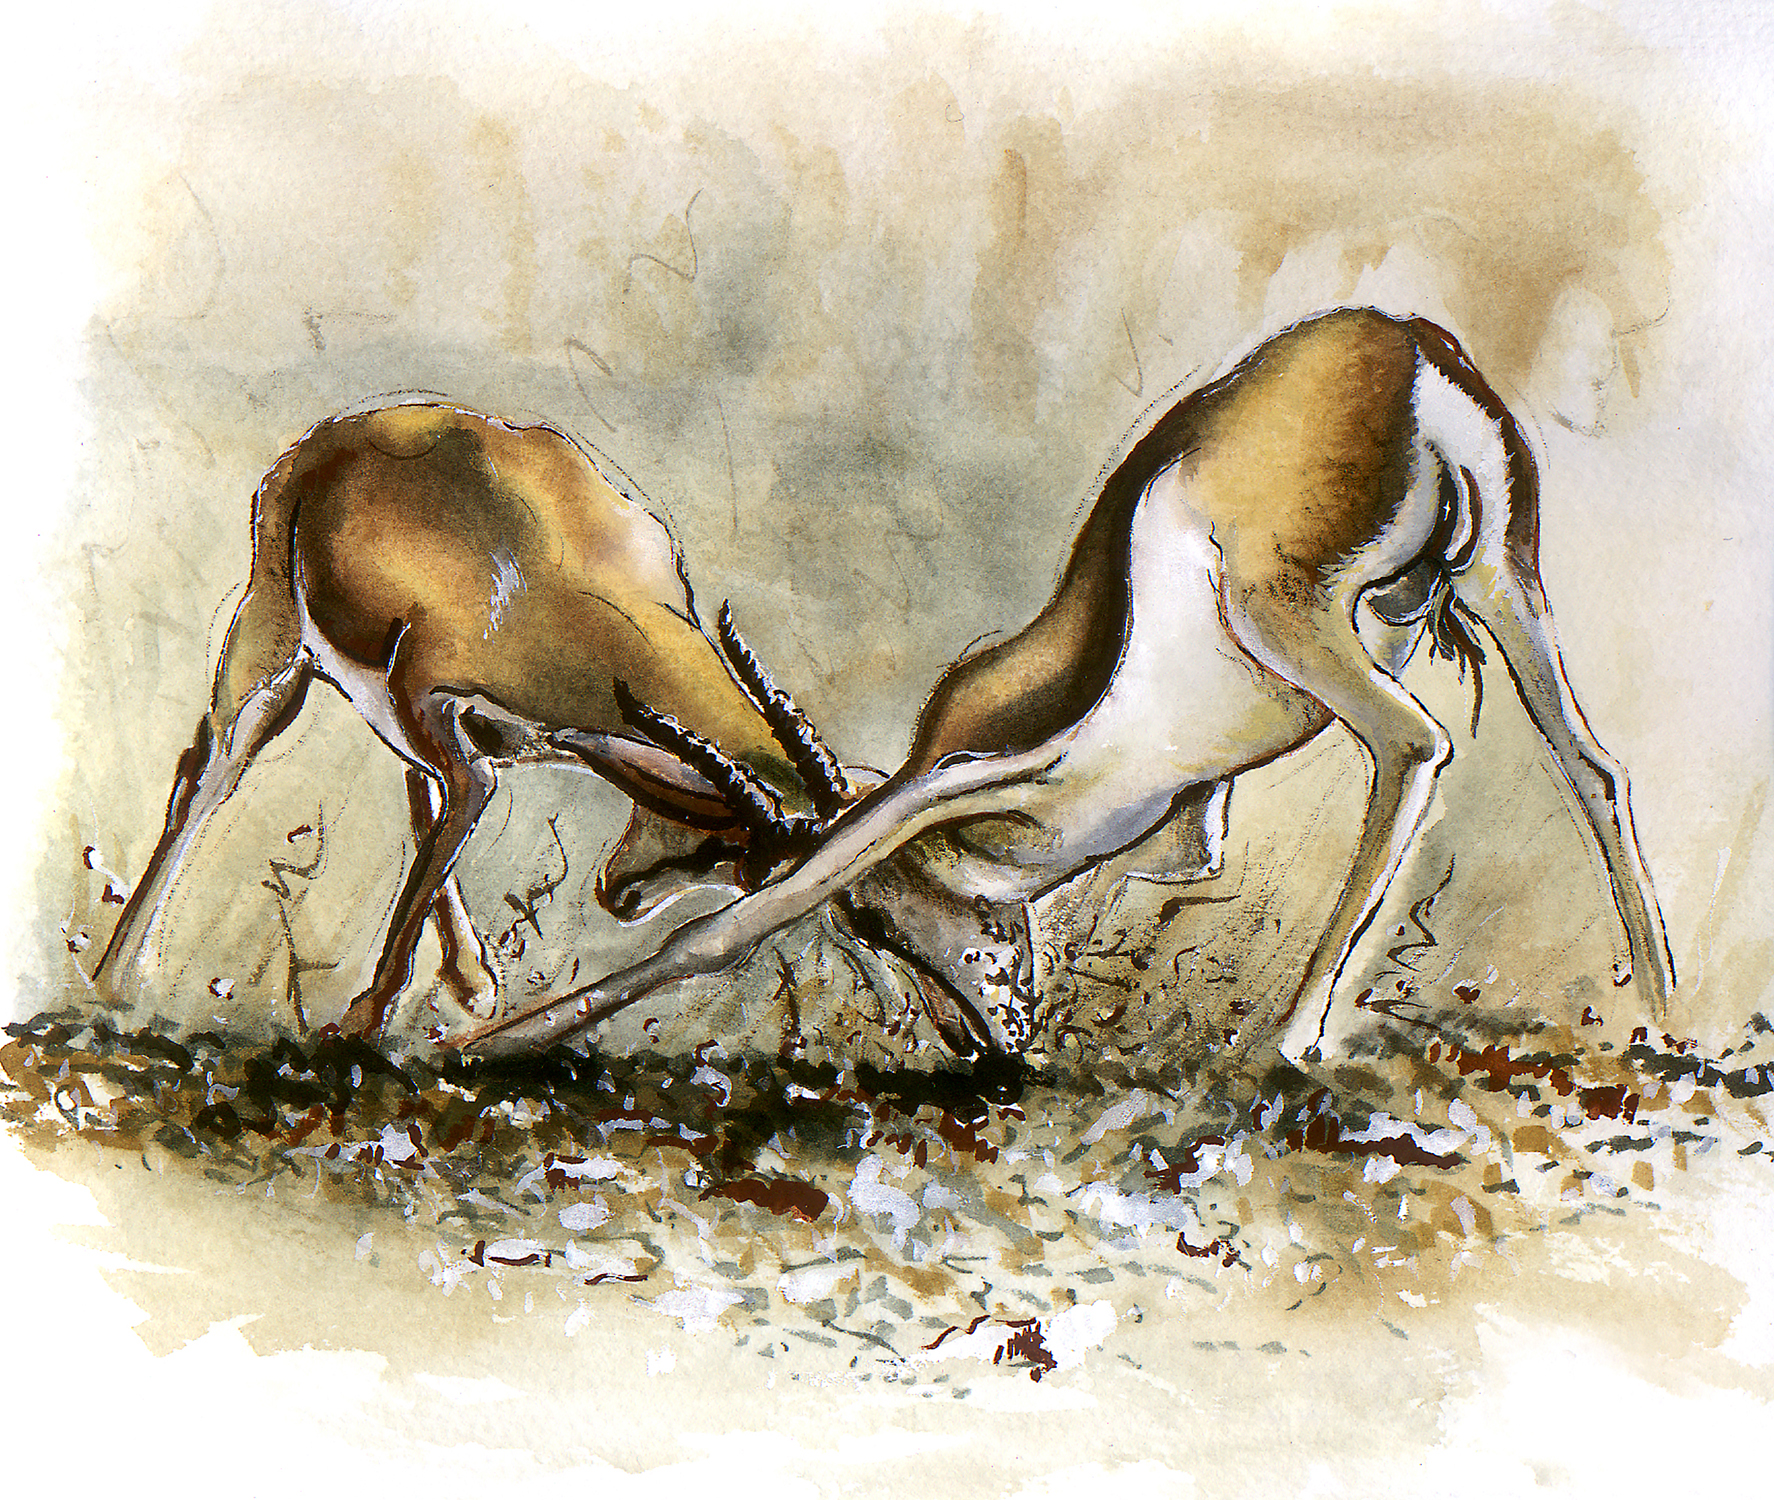 watercolour painting of gazelles sparring